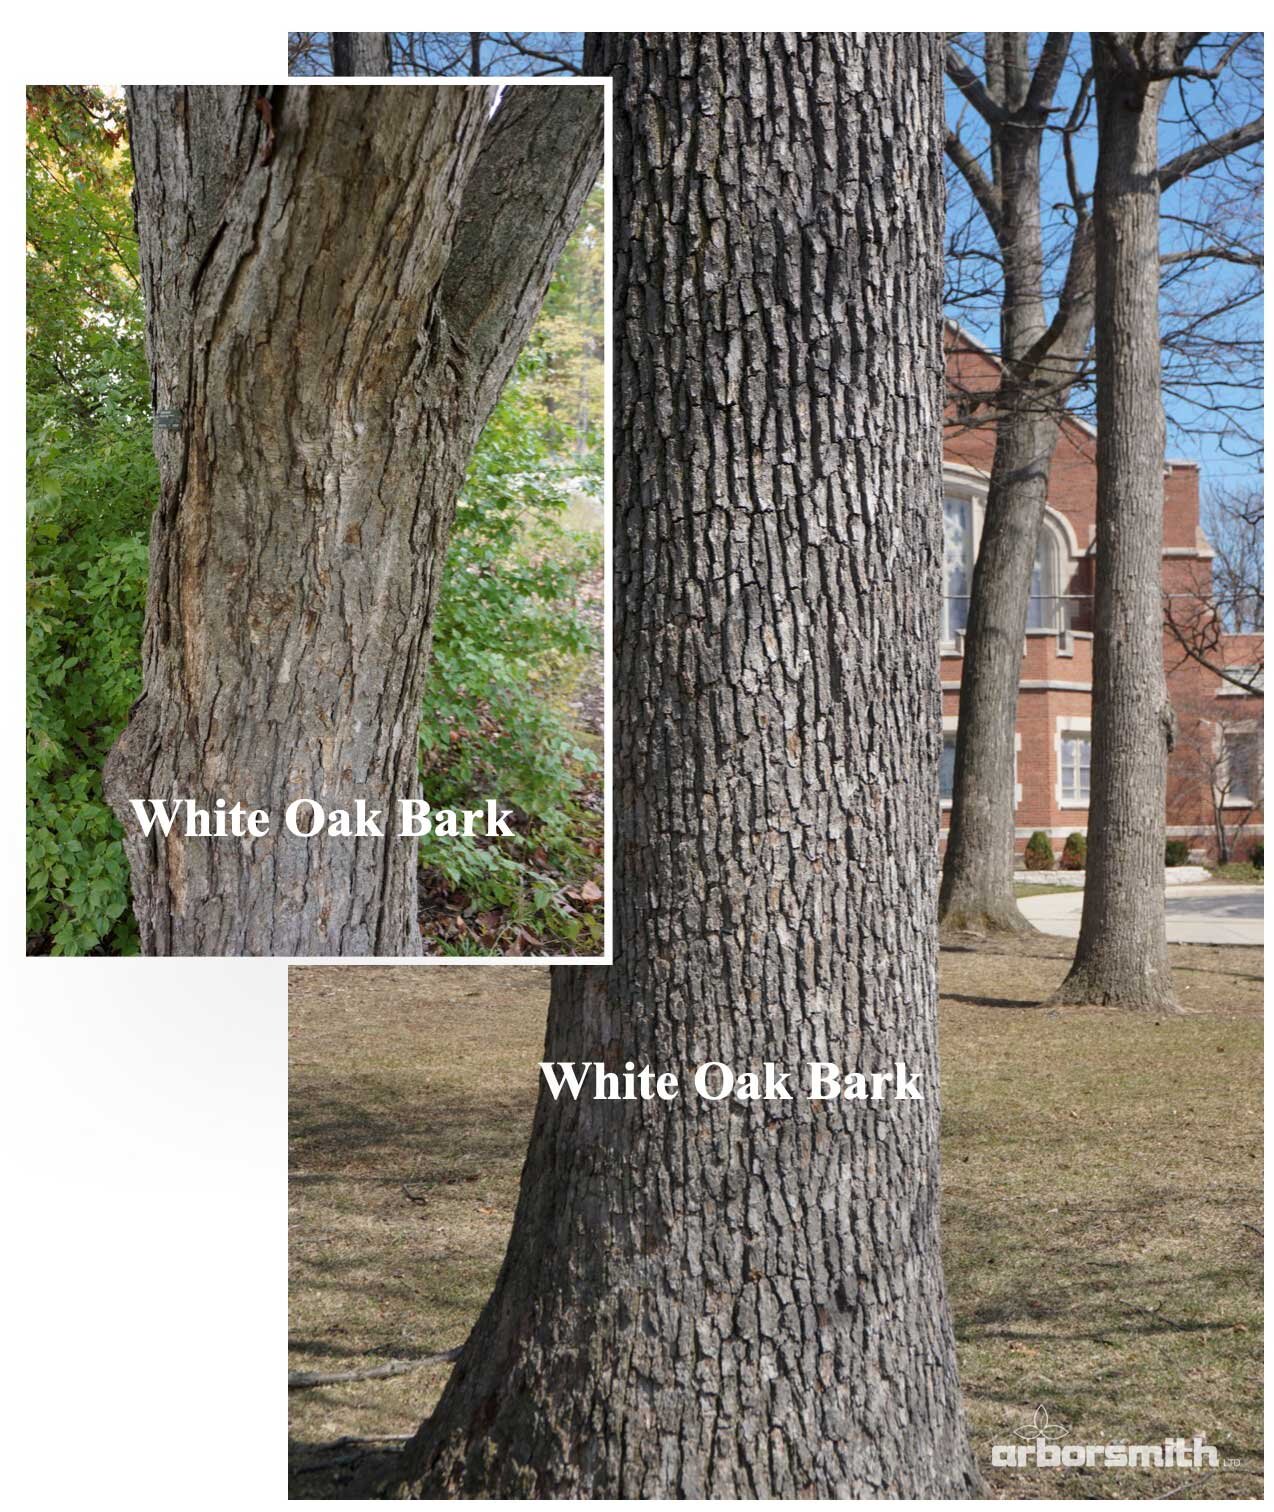 Getting to Know Your White Oak — Arborsmith, Ltd.® crafstman the care trees